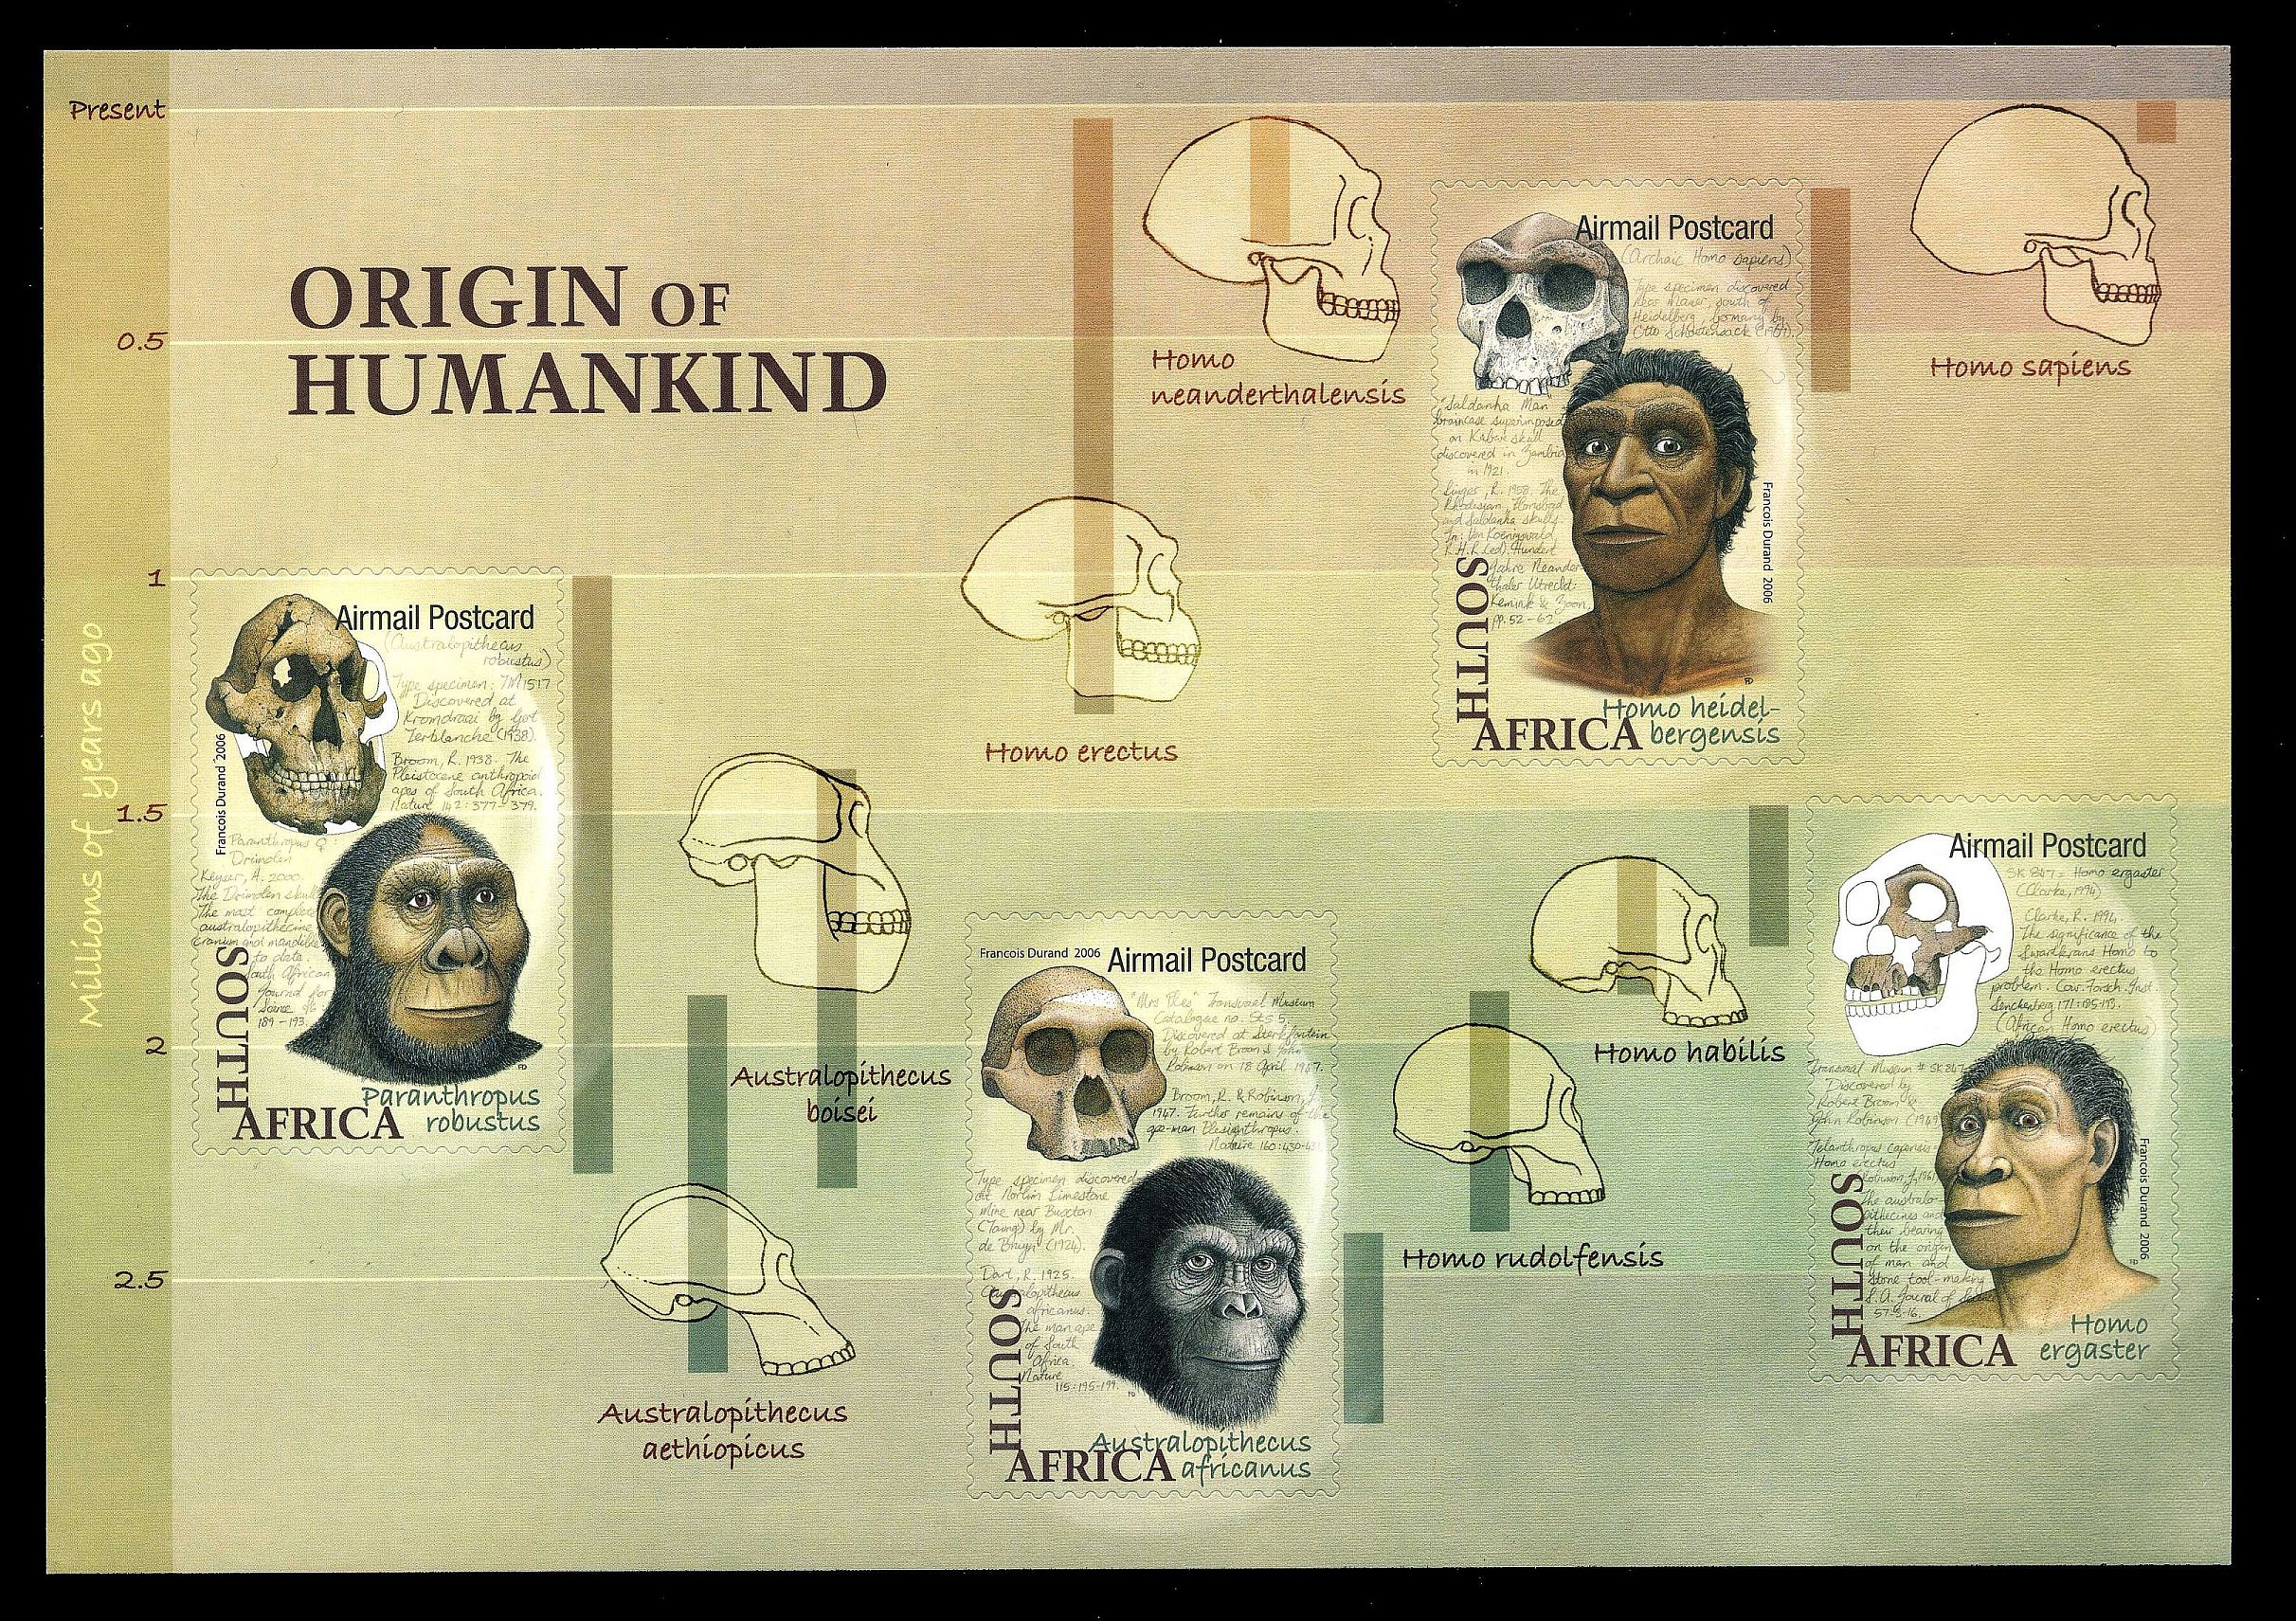 Origin of Humankind on self-adhesive stamps of South Africa